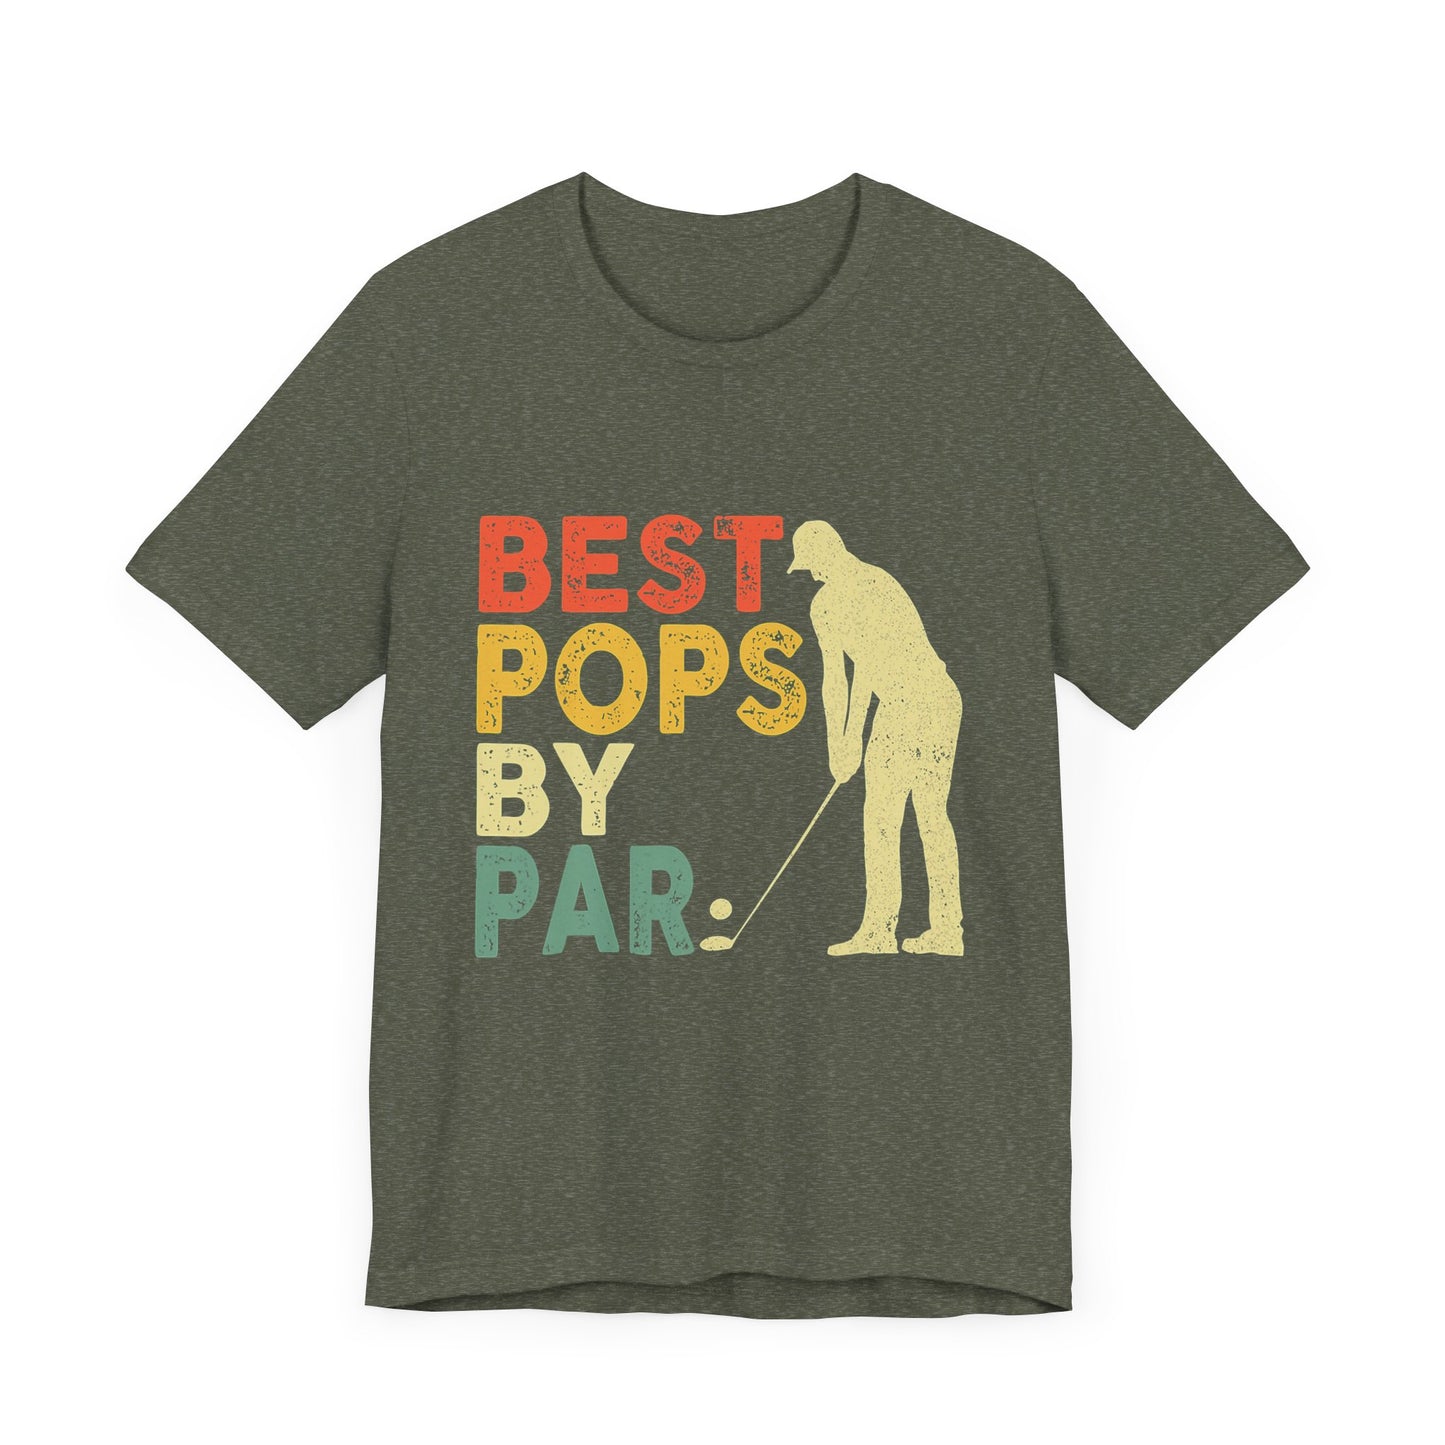 Best Pops By Par Father's Day Short Sleeve Tee